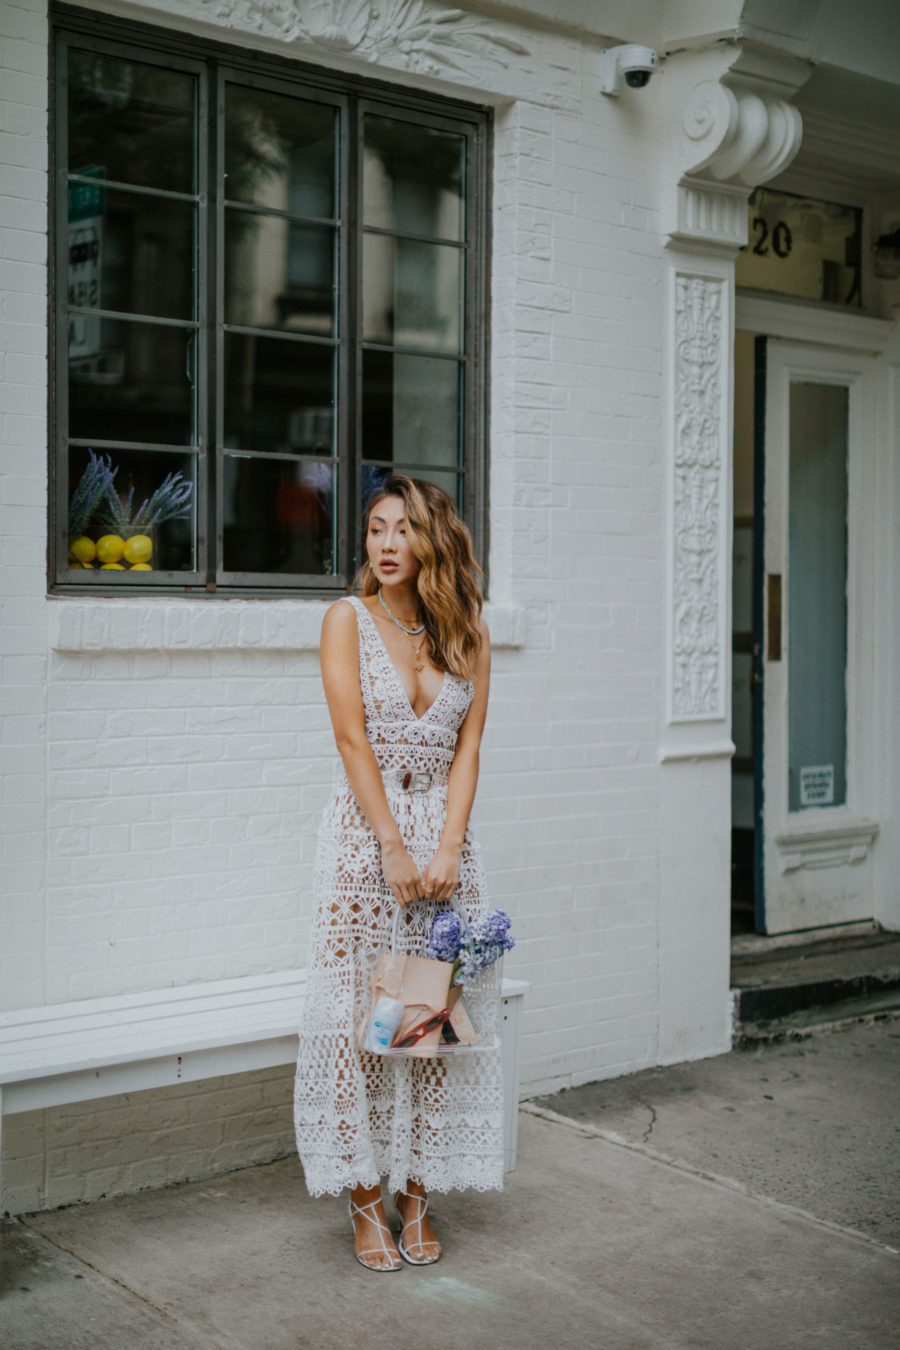 jessica wang wearing a lace white dress with a clear handbag while sharing her favorite wedding guest dresses from amazon // Jessica Wang - Notjessfashion.com